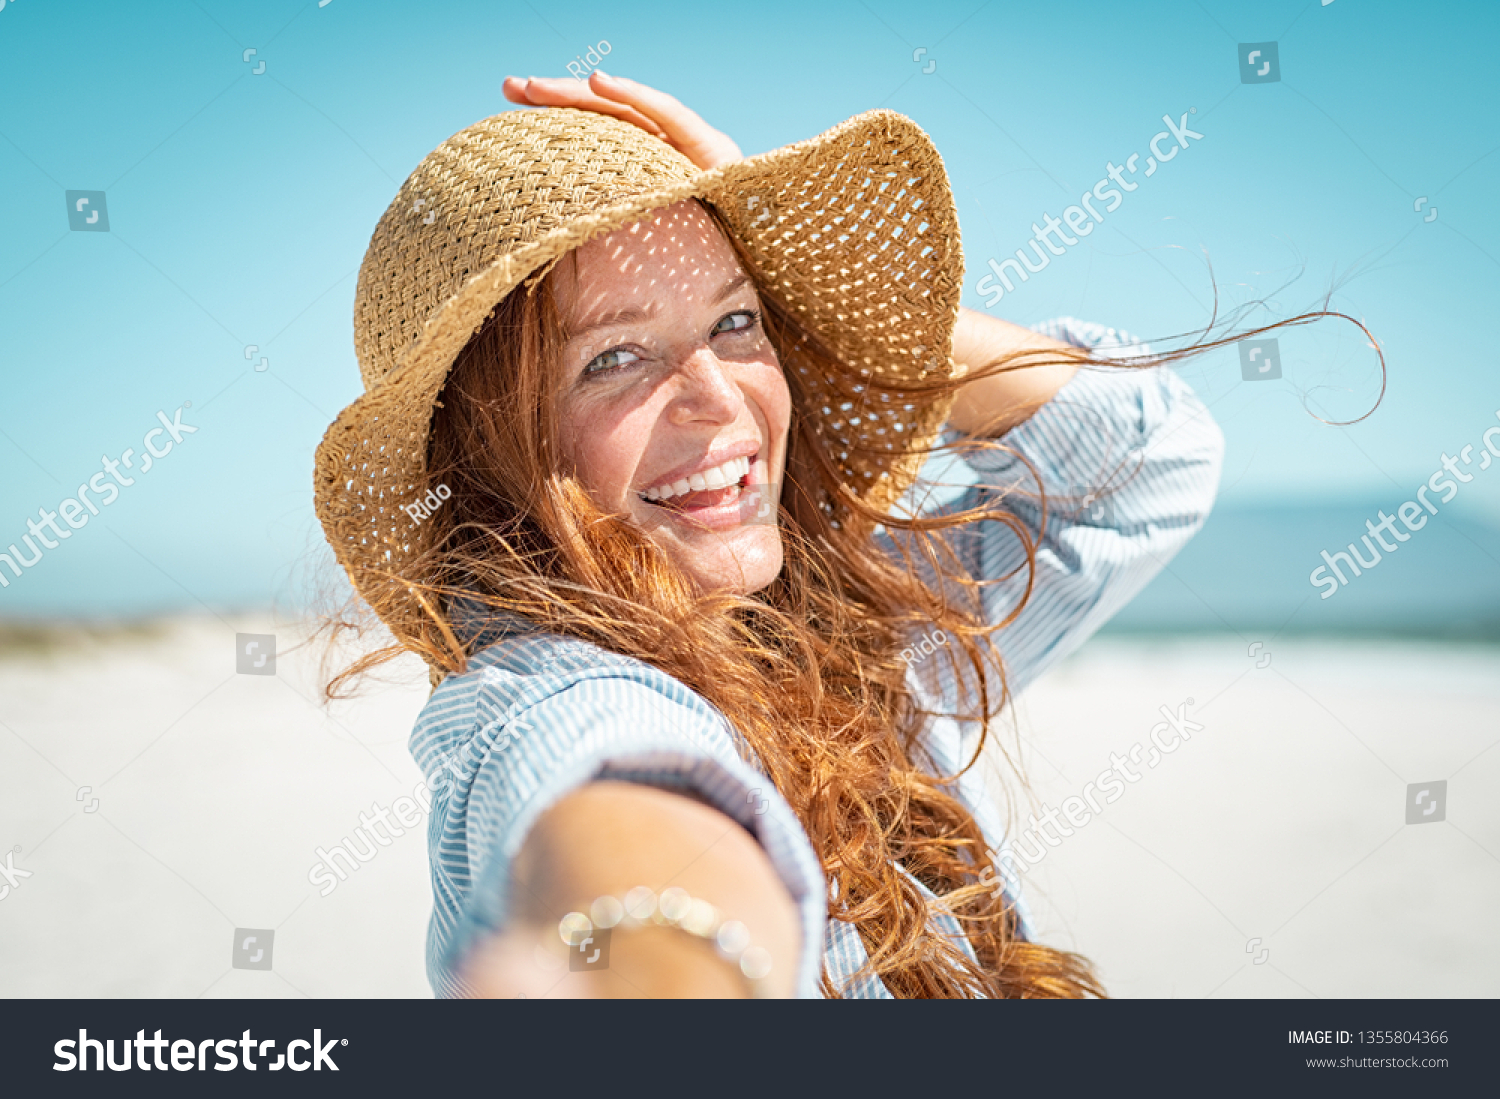 Portrait of beautiful mature woman in casual wearing straw hat at seaside. Cheerful young woman smiling at beach during summer vacation. Happy girl with red hair and freckles enjoying the sun. #1355804366